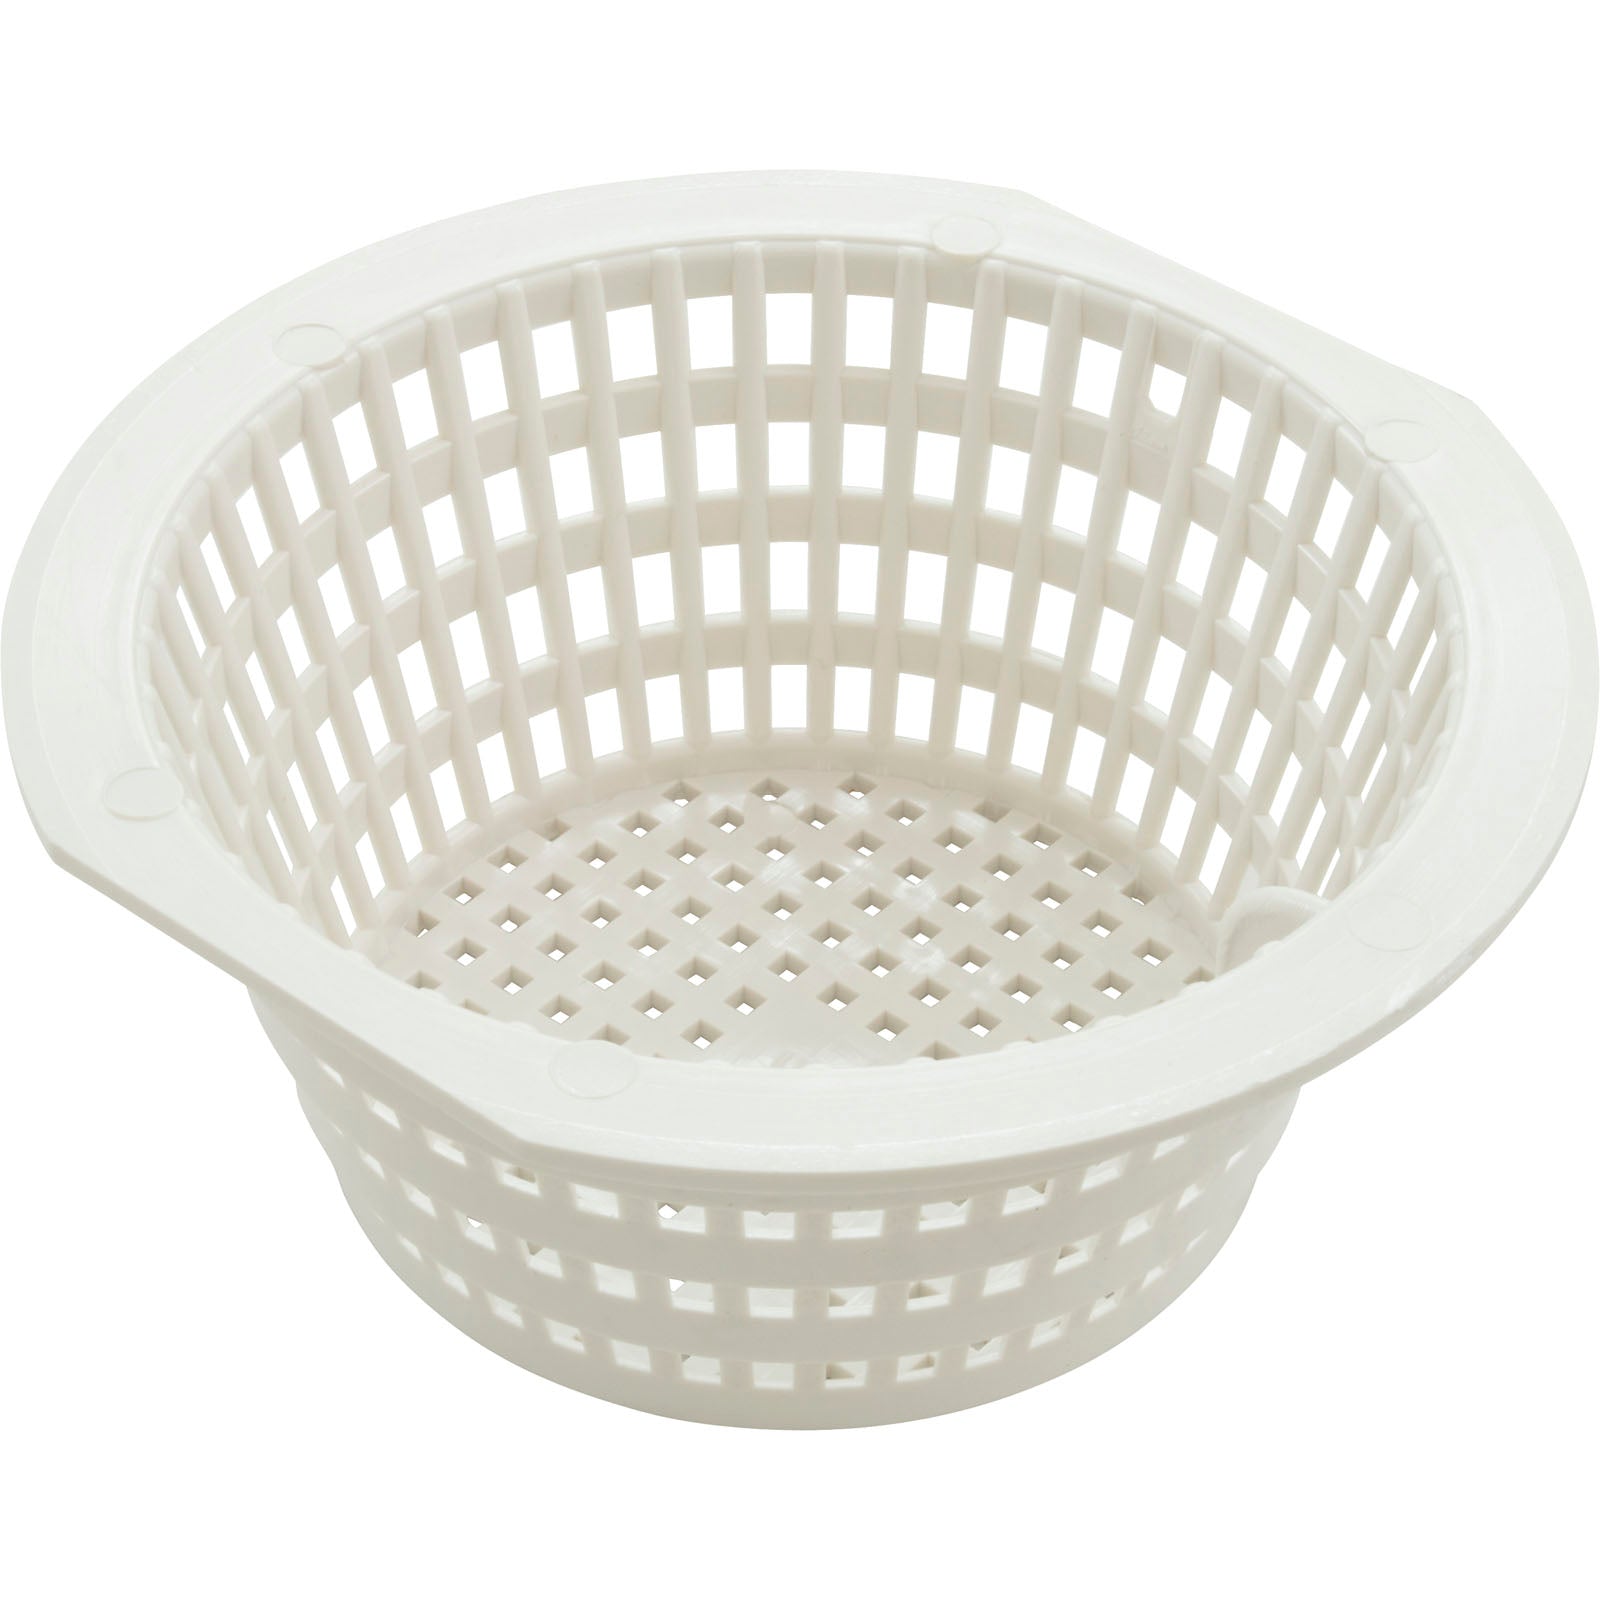 Waterway Jacuzzi Replacement Skimmer Basket [Model #AGS6] (519-8300)